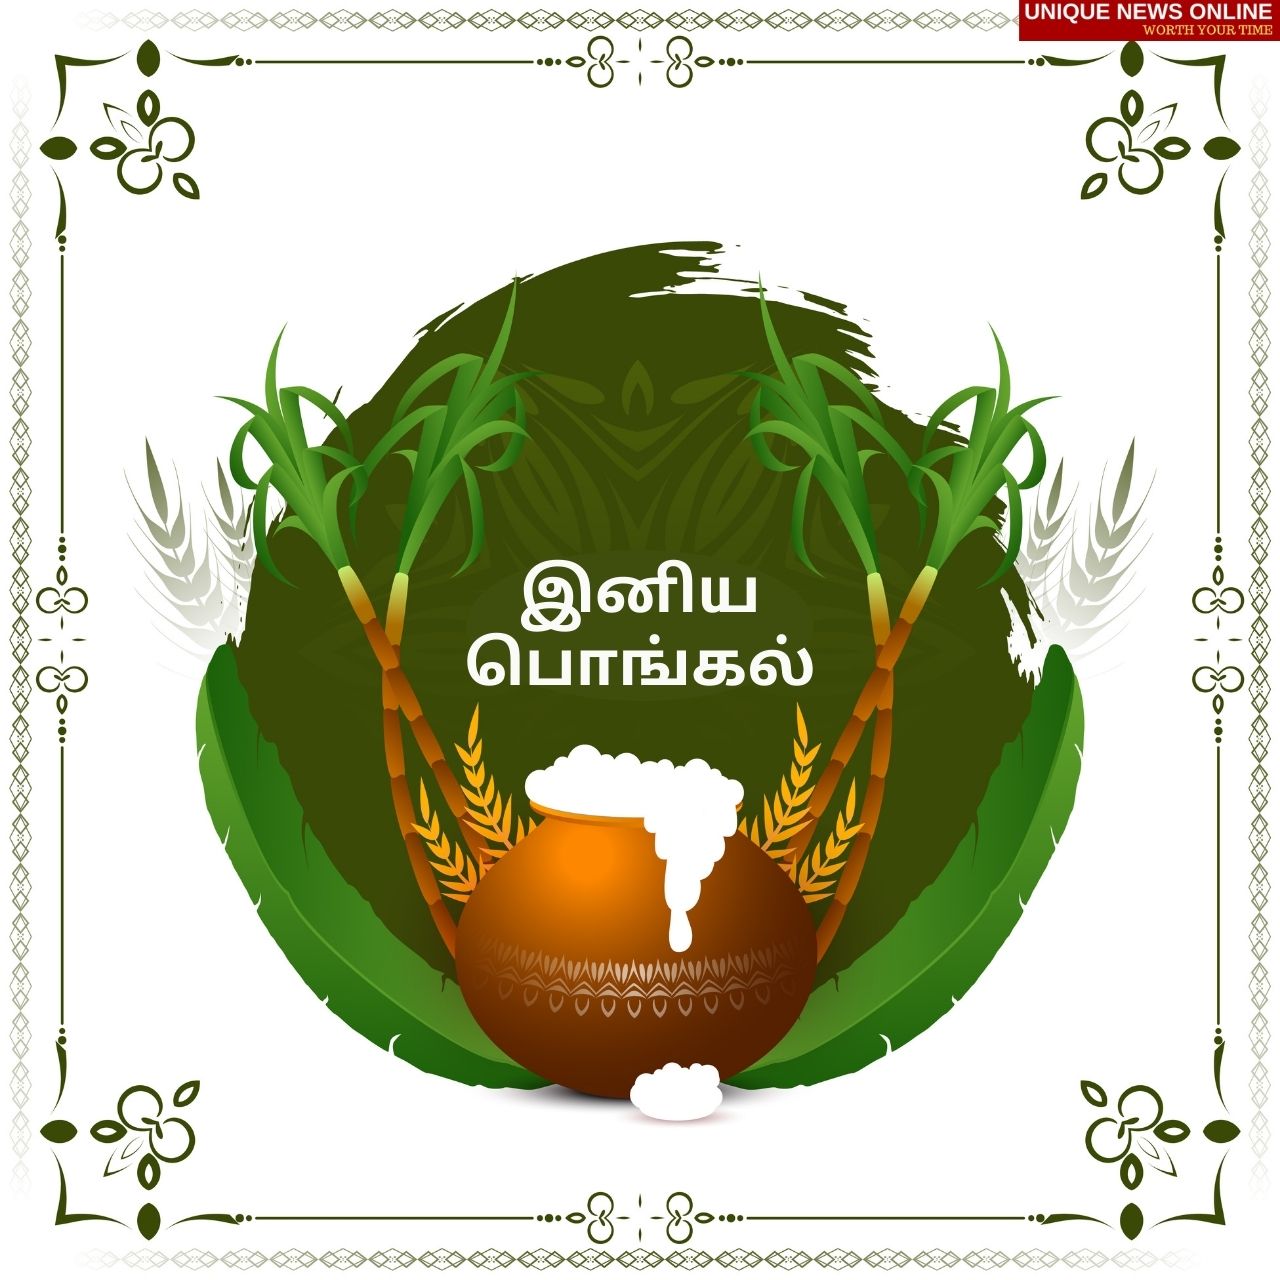 Pongal 2022: Tamil Greetings, Quotes, Wishes, HD Images, Messages, Sayings to greet your loved ones